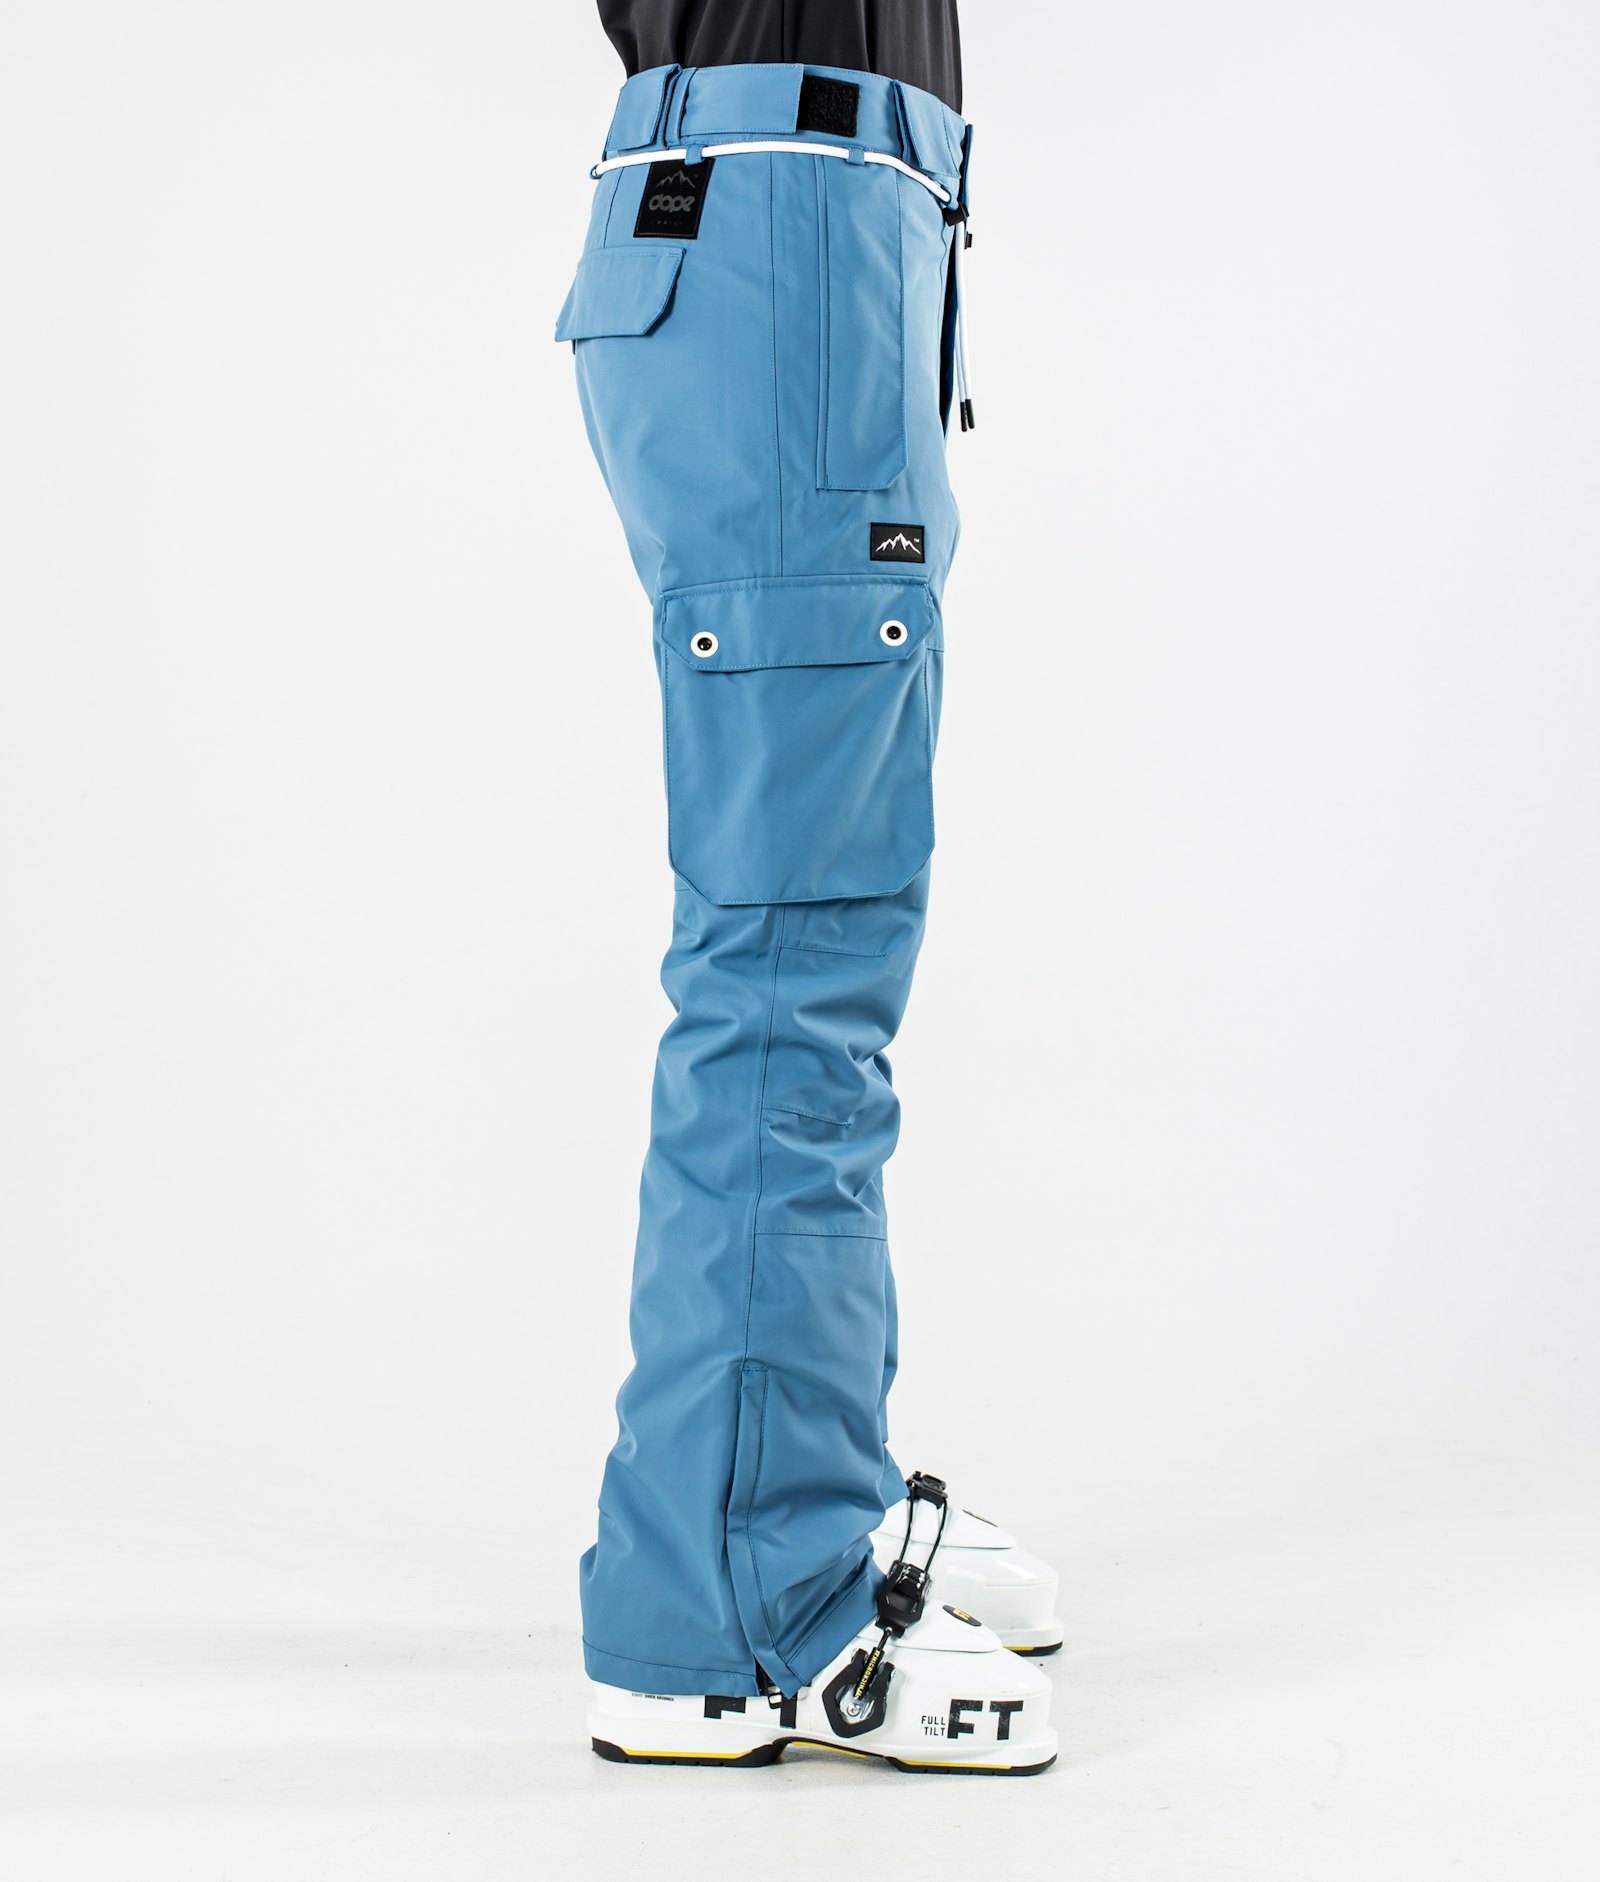 Dope Iconic W 2020 Pantalones Esquí Mujer Blue Steel